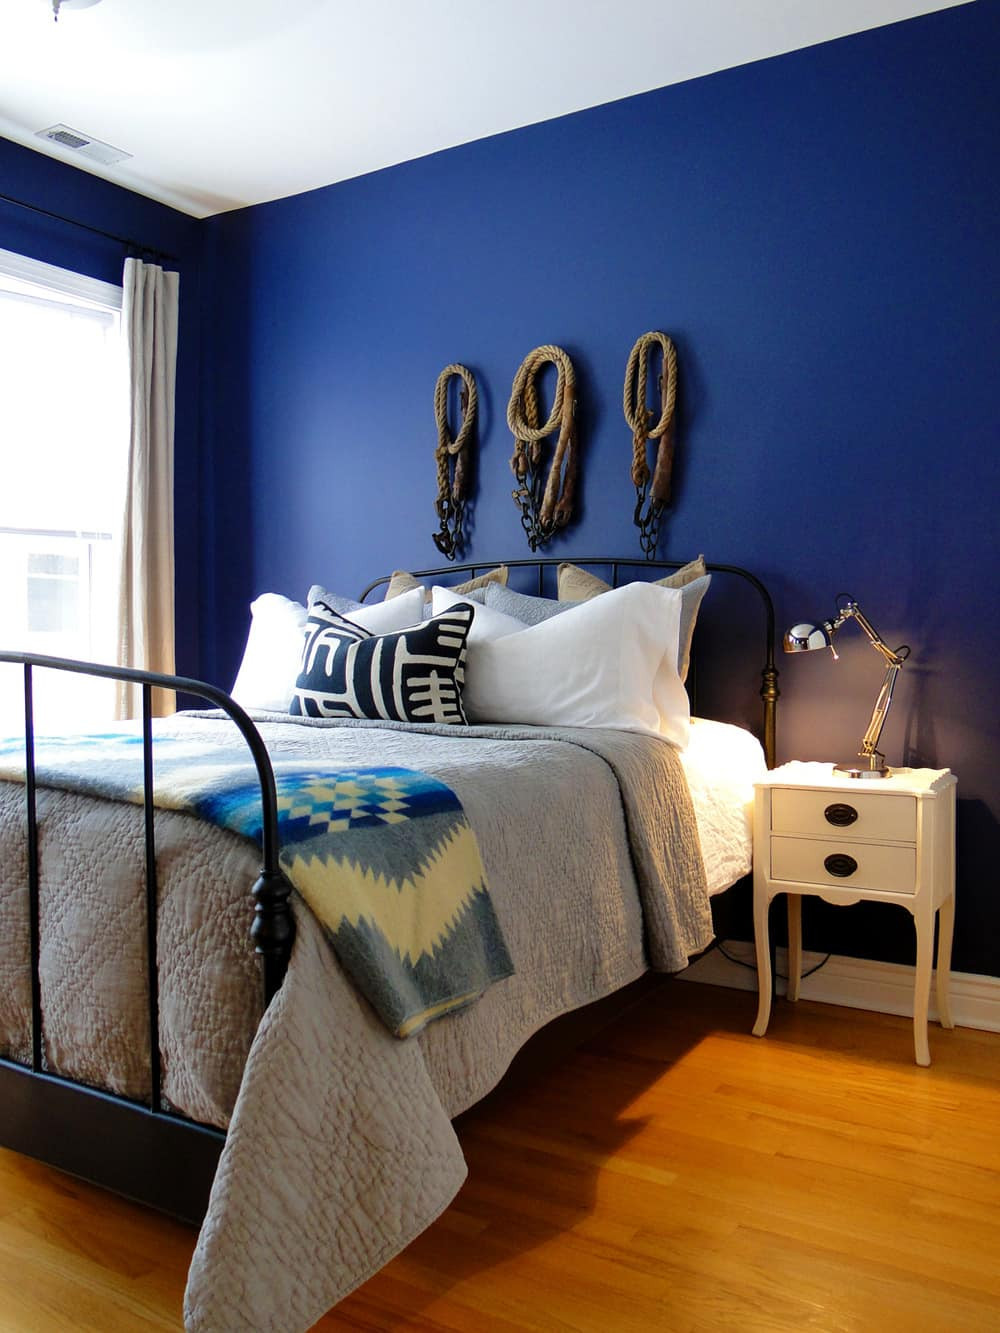 Blue Paint Colors For Bedroom
 20 Bold & Beautiful Blue Wall Paint Colors